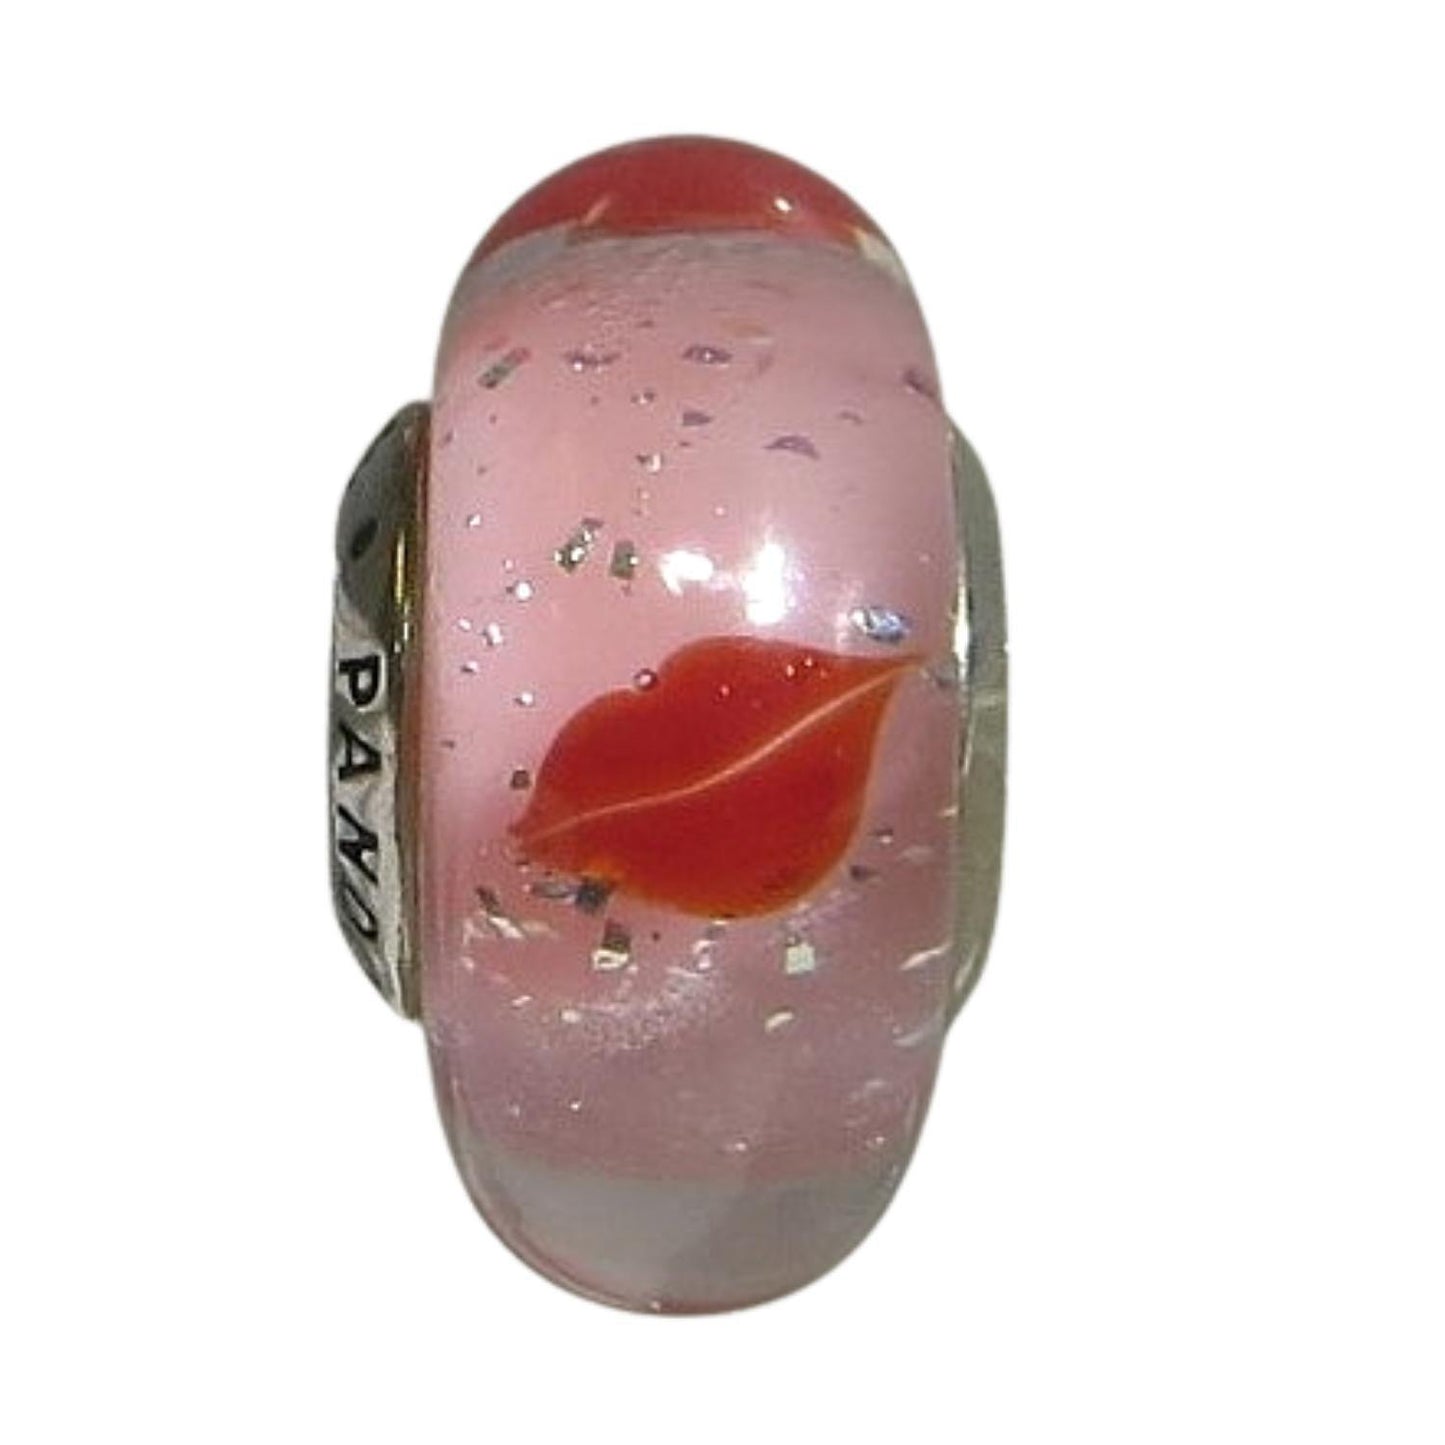 PANDORA 796598 – Murano Glass Kisses All Around - Red Lips on Pink Back with Embedded Silver Flecks - Woman’s Sterling Silver Charm - Charming Jilly